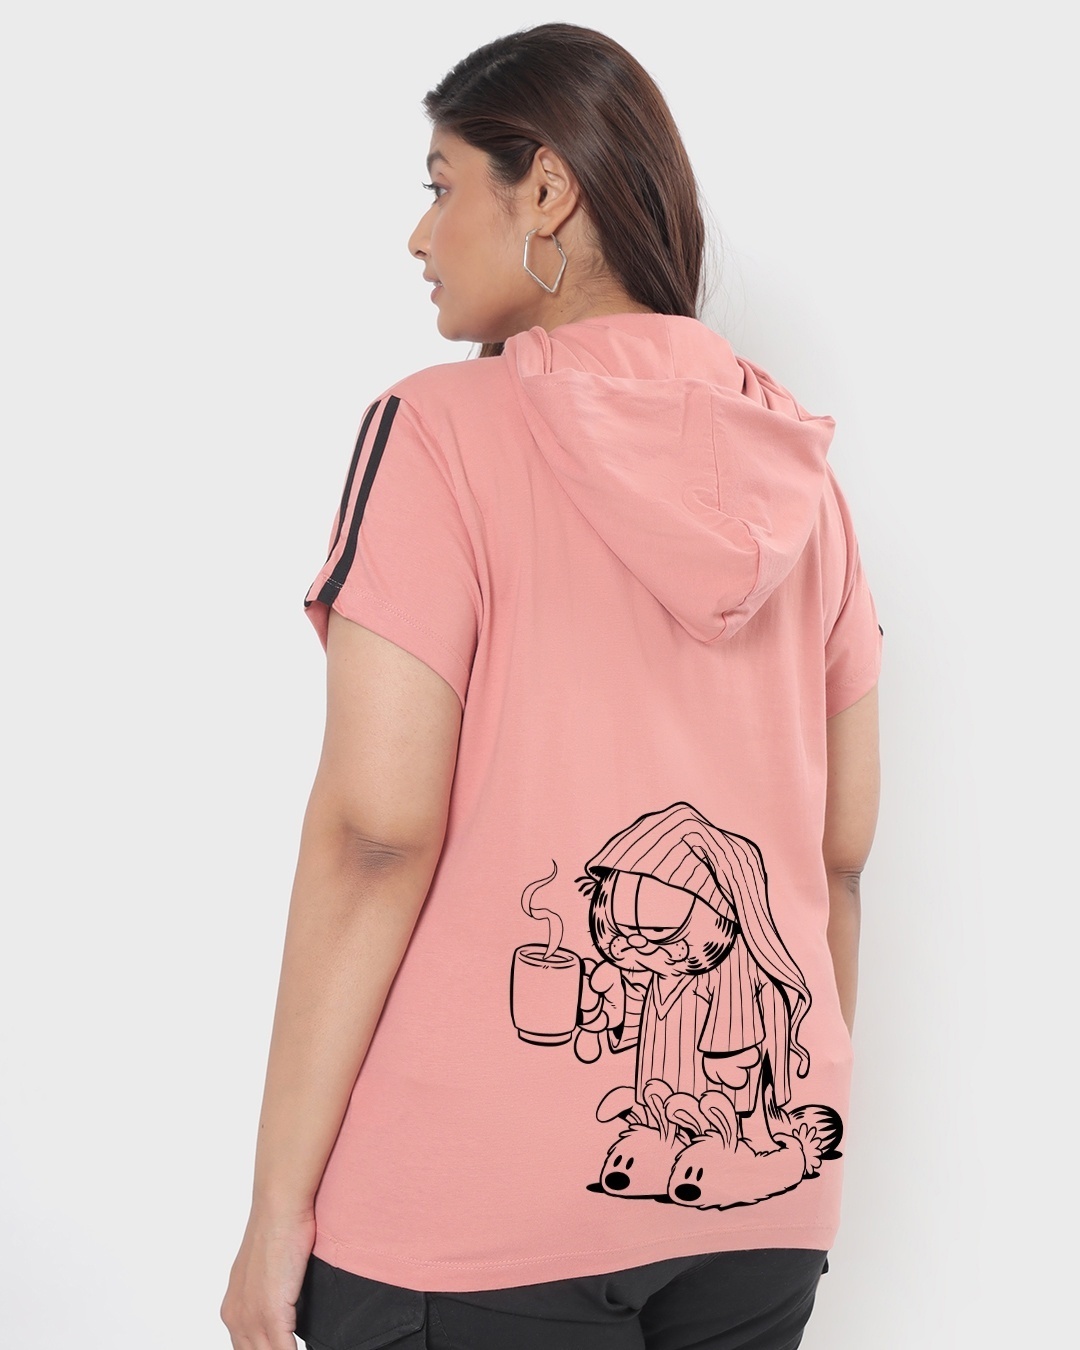 Shop Women's Pink Garfield's Morning Graphic Printed Plus Size Hoodie-Design